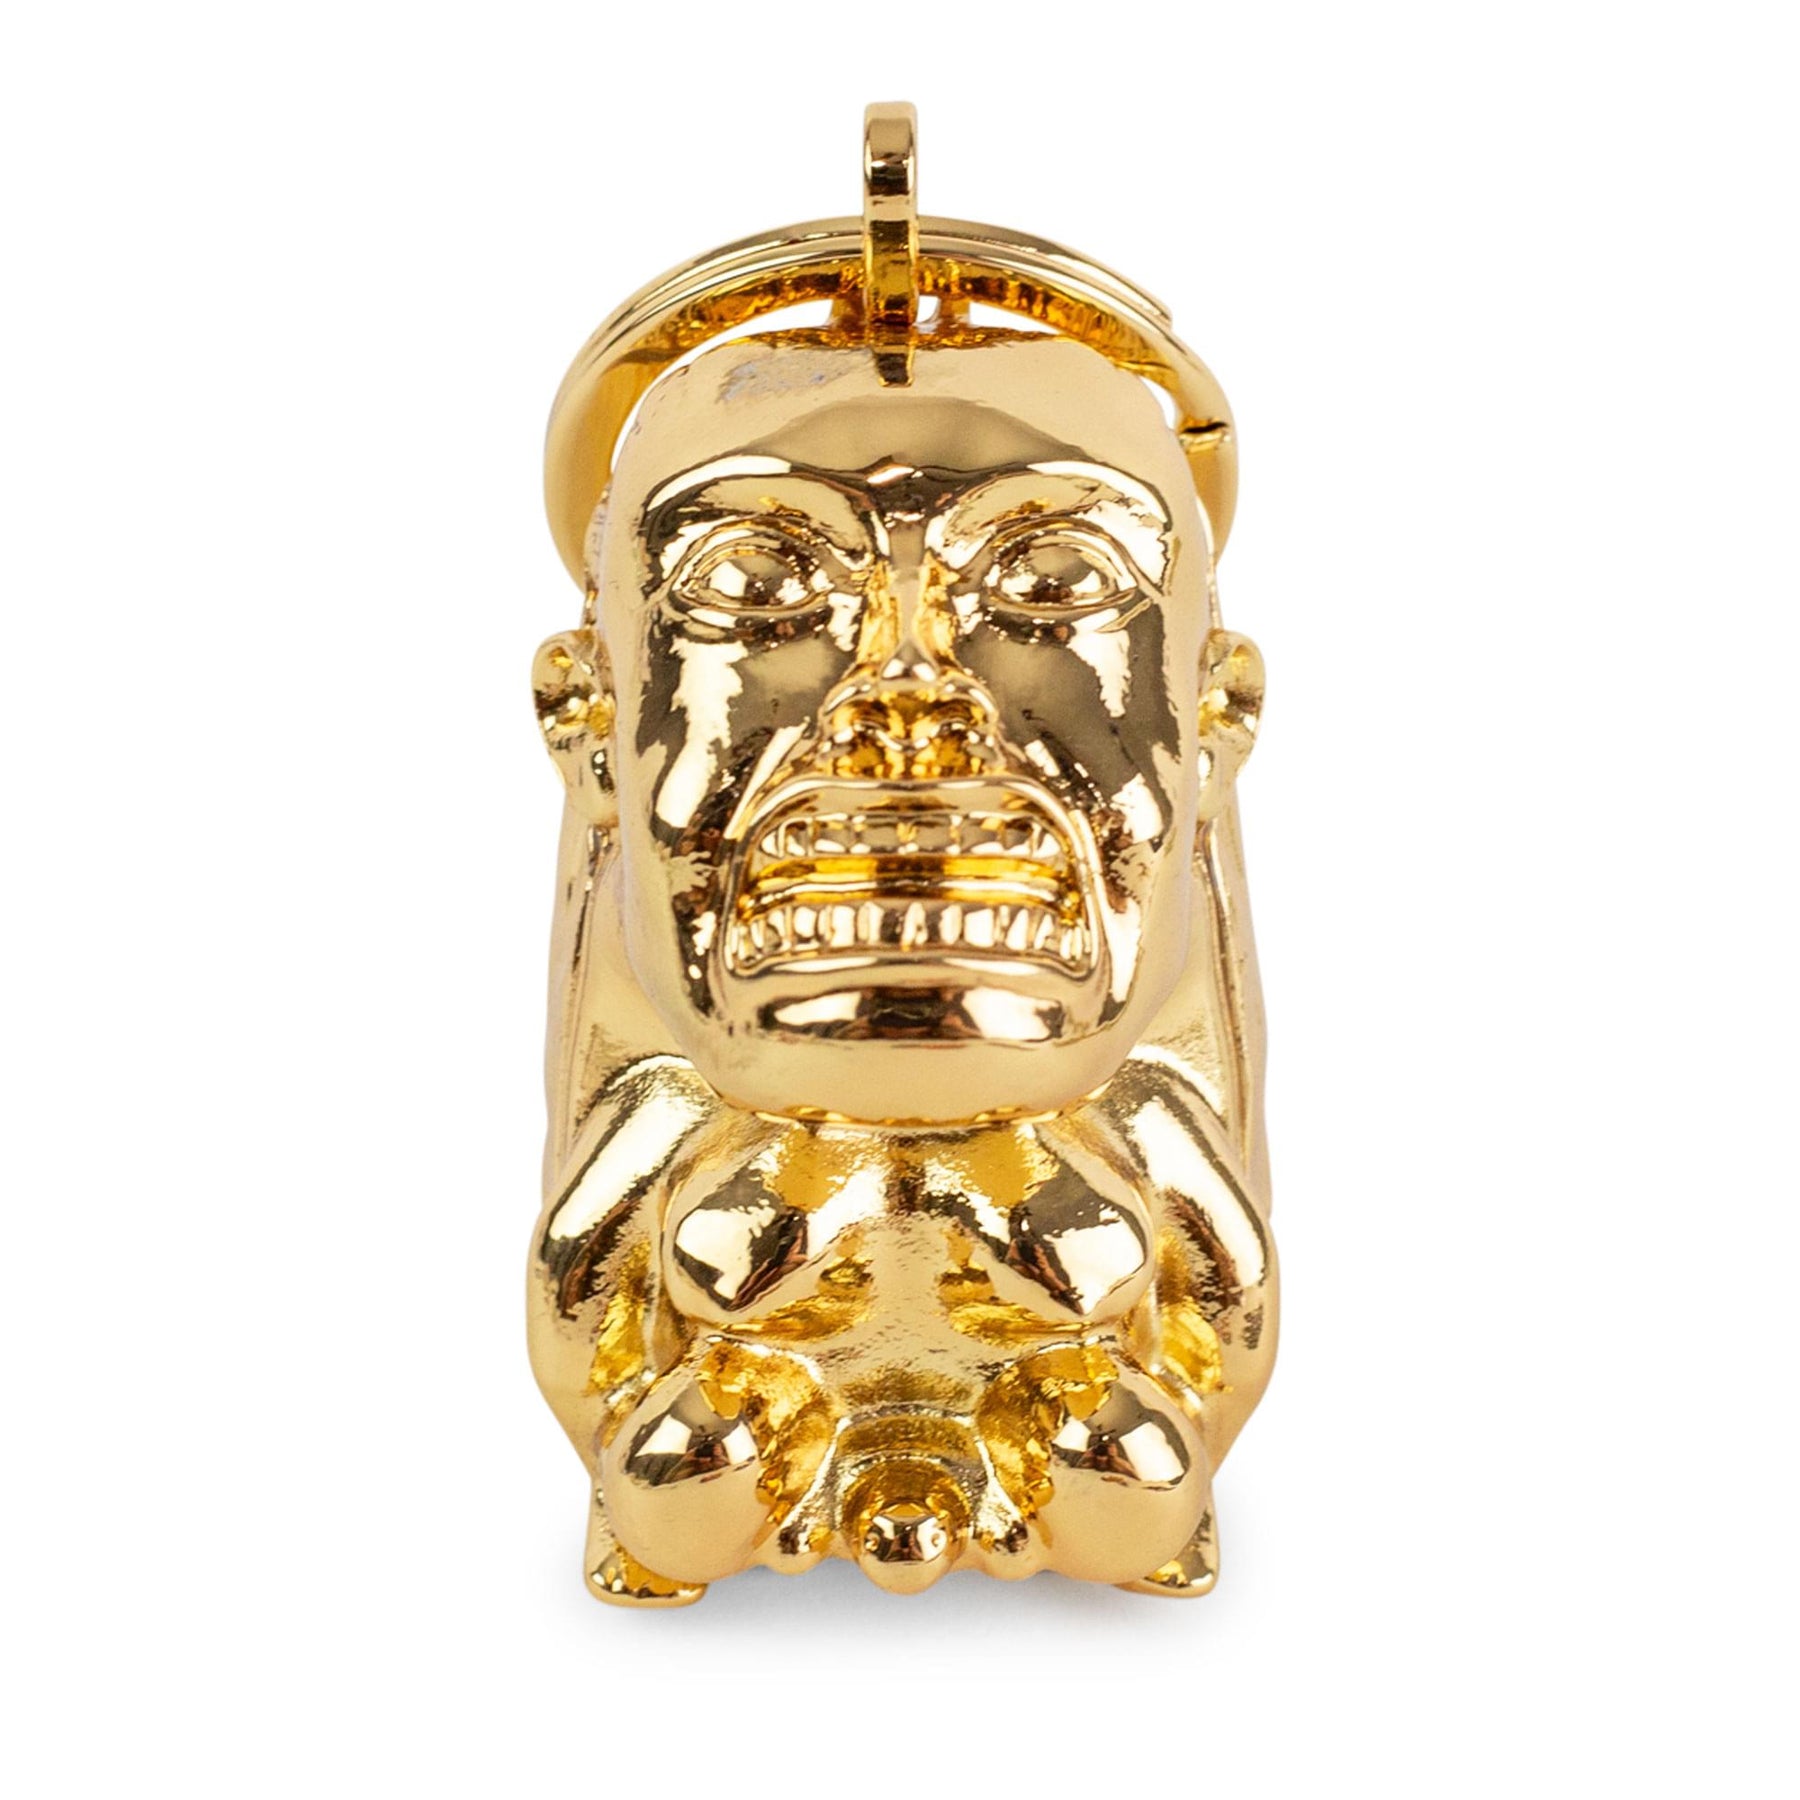 Indiana Jones Raiders of the Lost Ark Detailed Golden Idol Old 